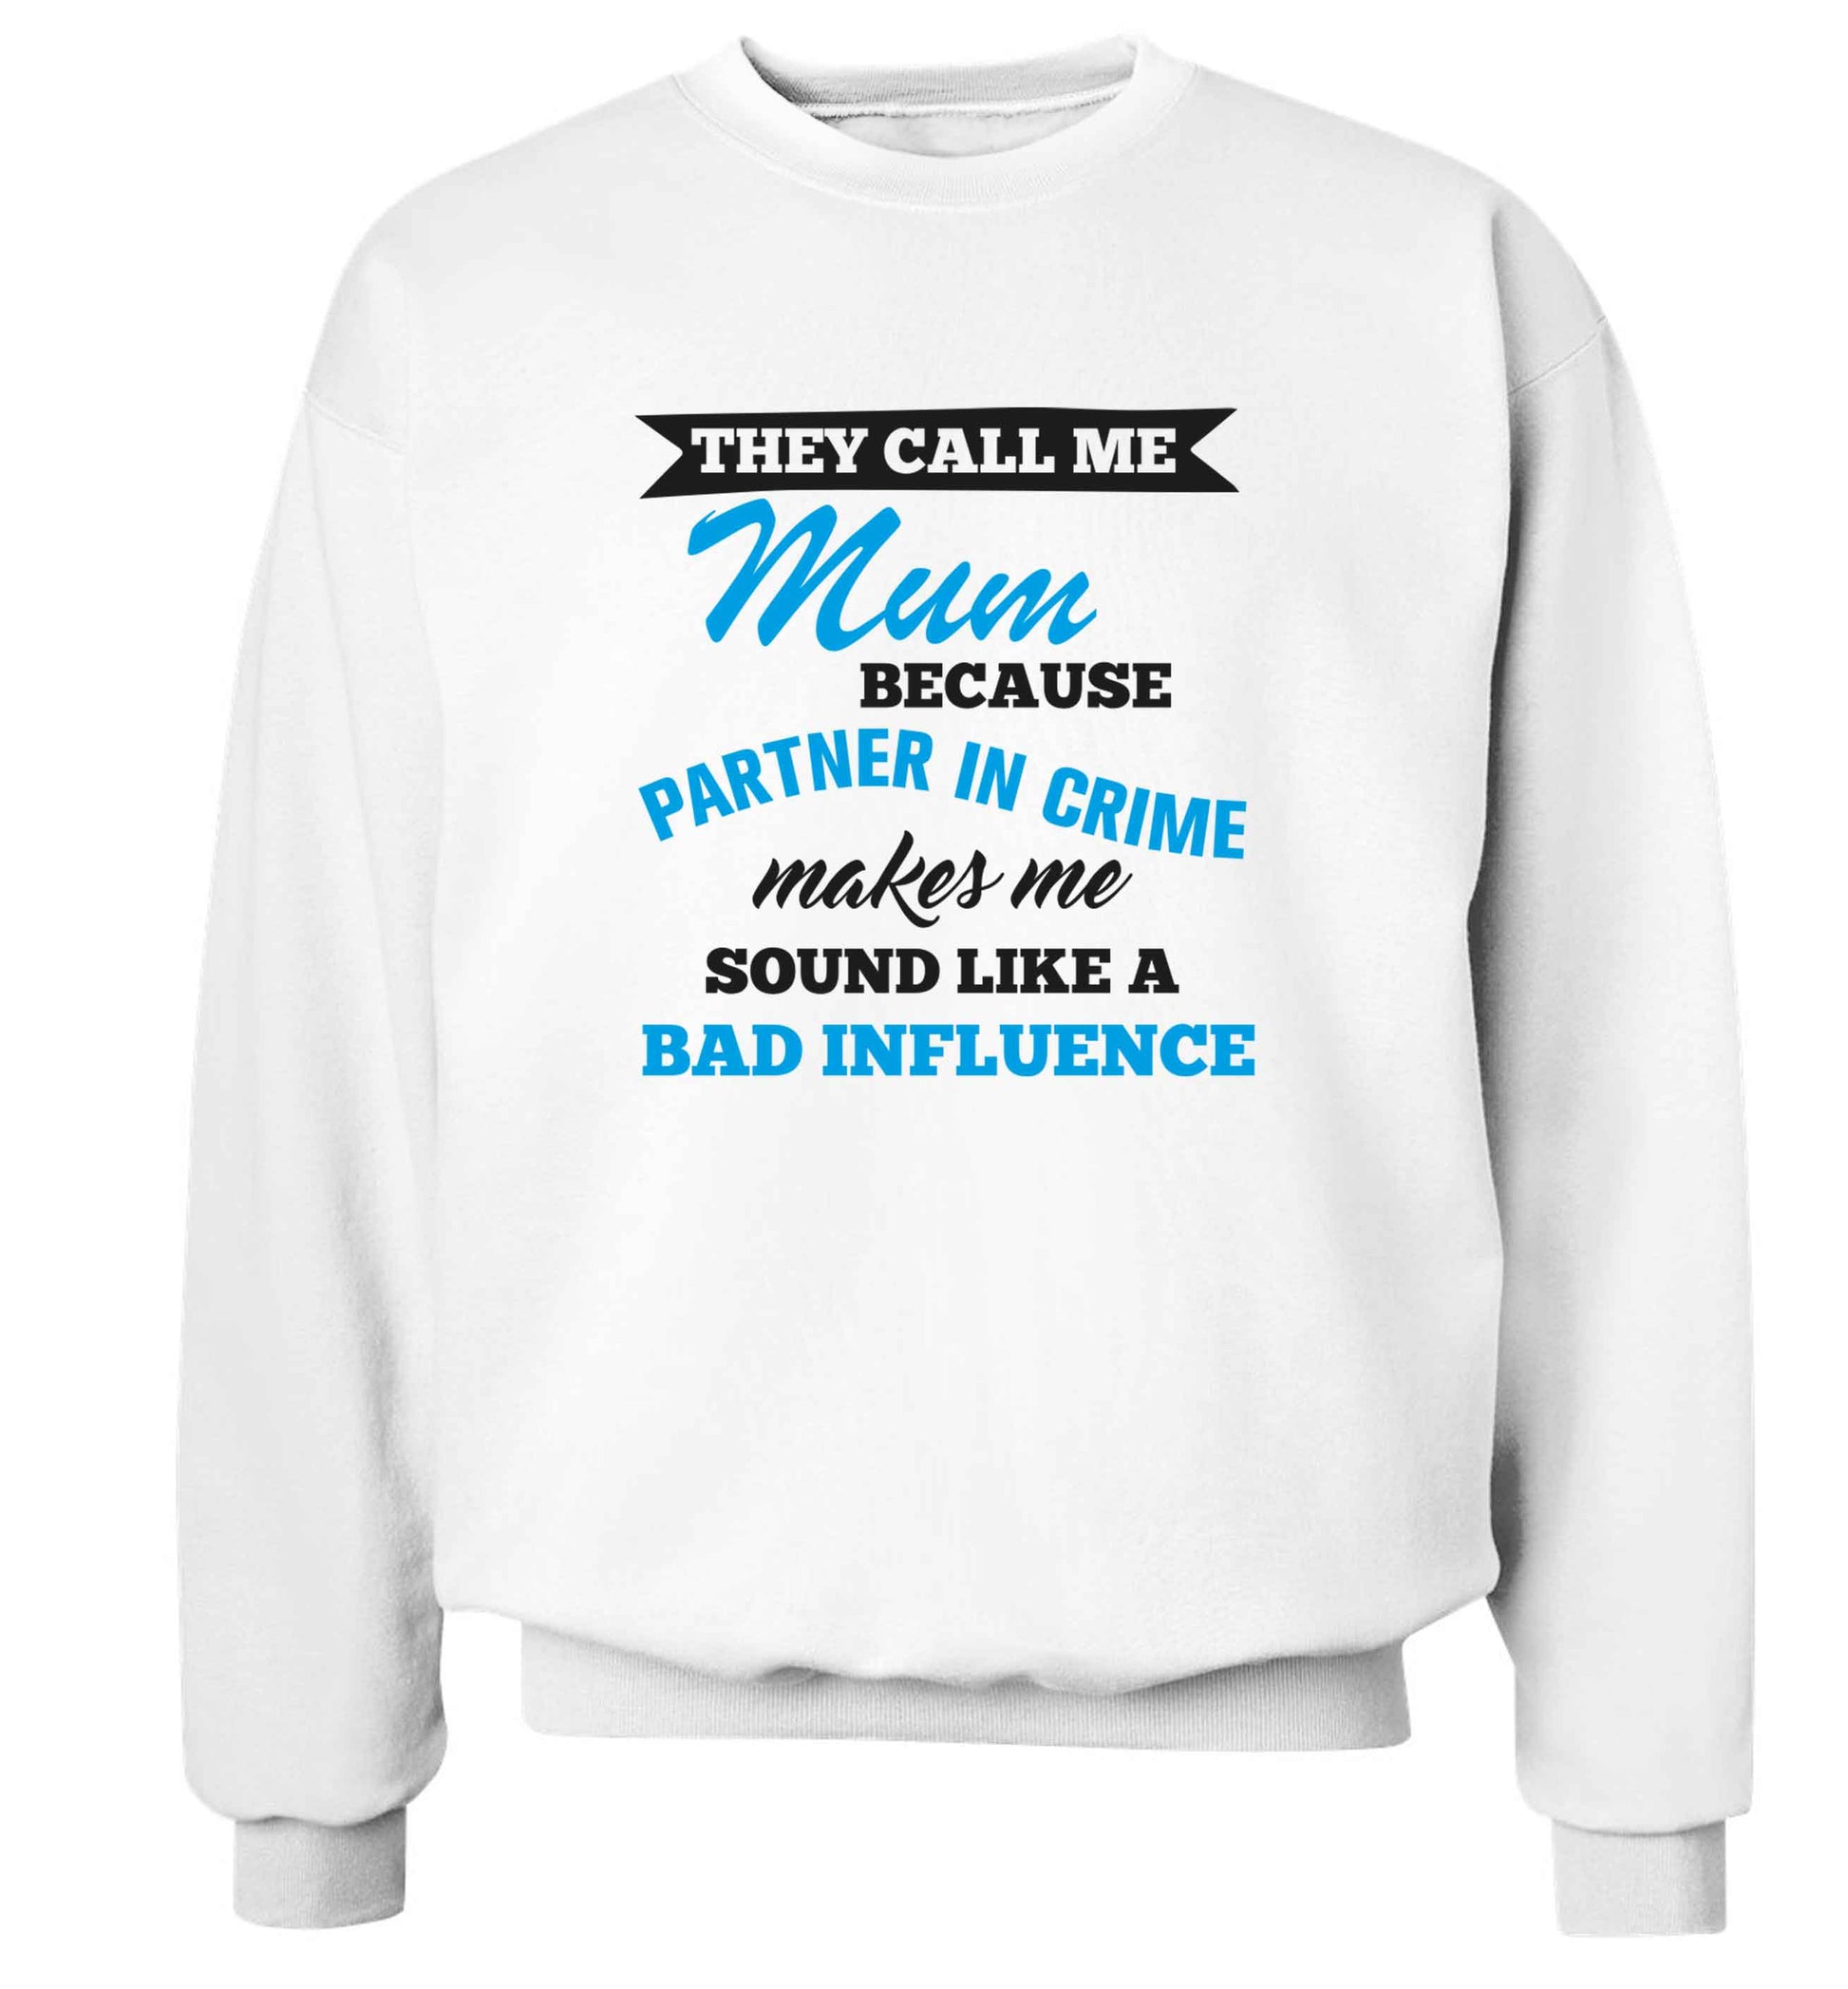 They call me mum because partner in crime makes me sound like a bad influence adult's unisex white sweater 2XL